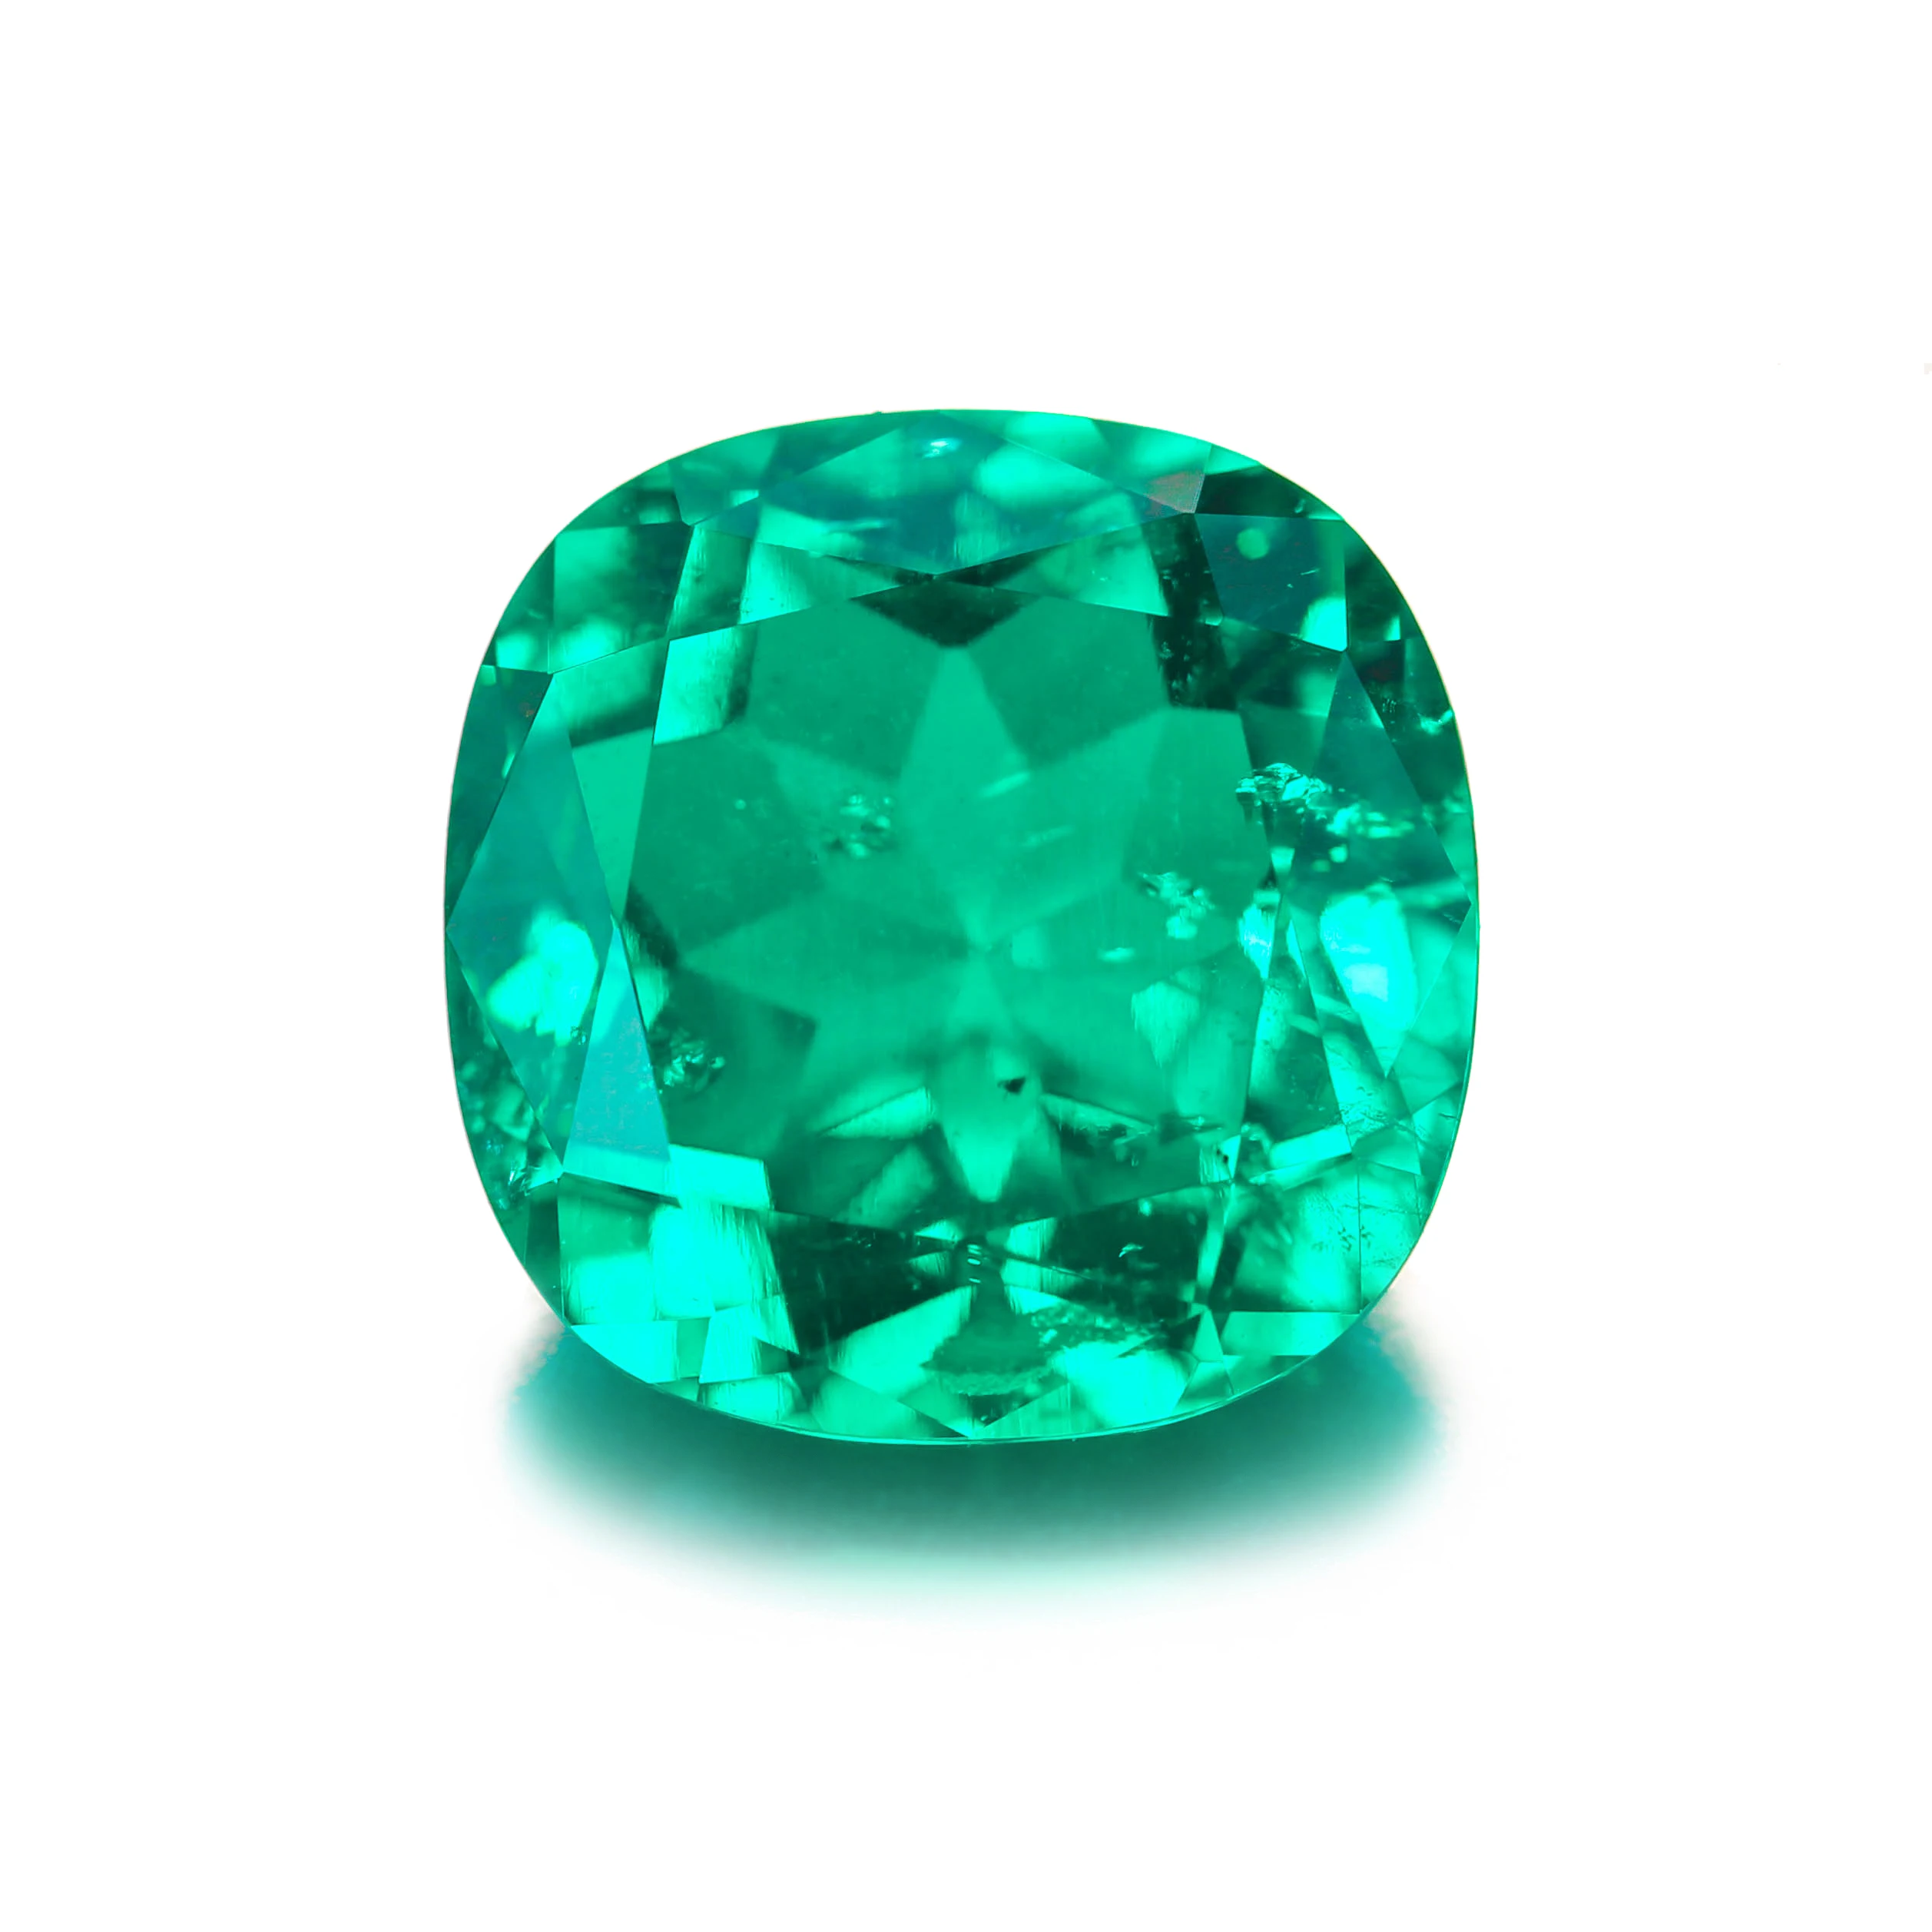 

high quality 3EX cushion cut Hydrothermal lab created doublet colombia emerald price per carat Loose Gemstone stone free fire di